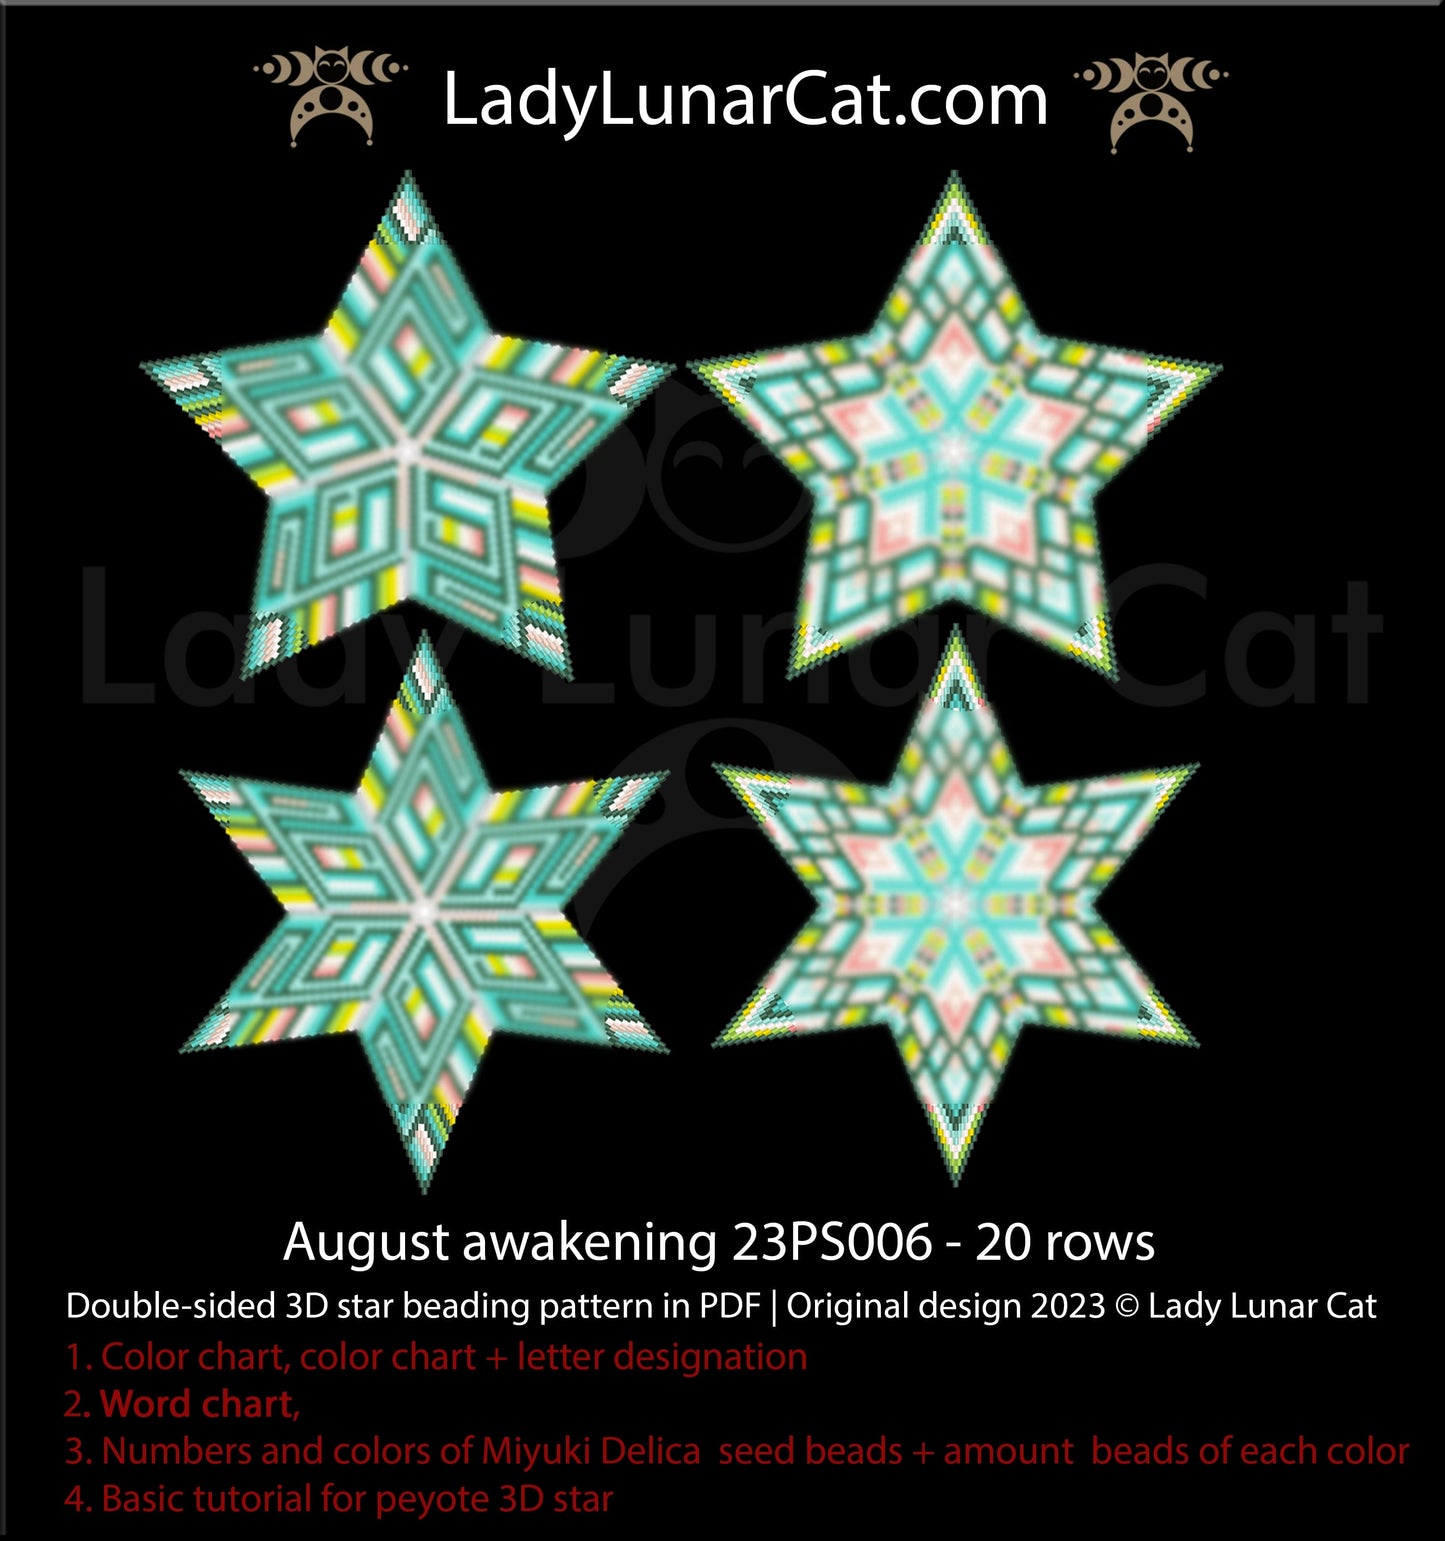 Copy of Peyote star pattern for beading - Summer 23PS00314 rows LadyLunarCat